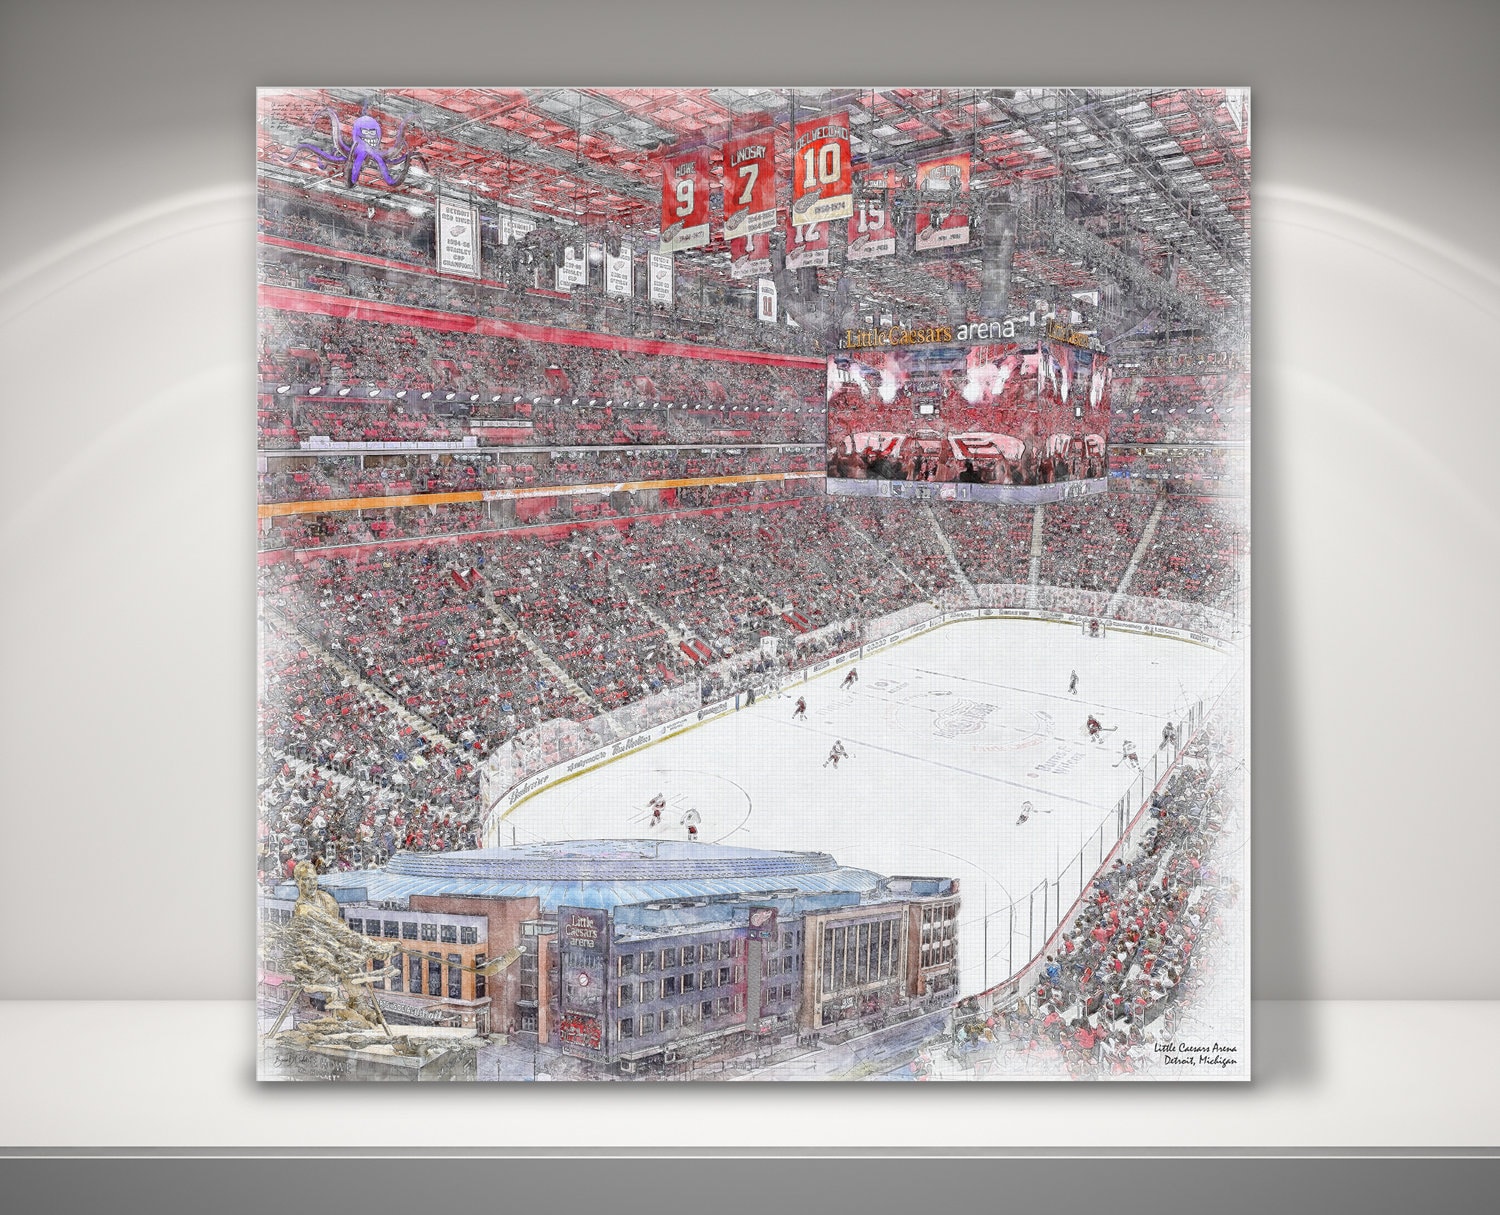 Joe Louis Arena auction gives you chance to own Al the Octopus